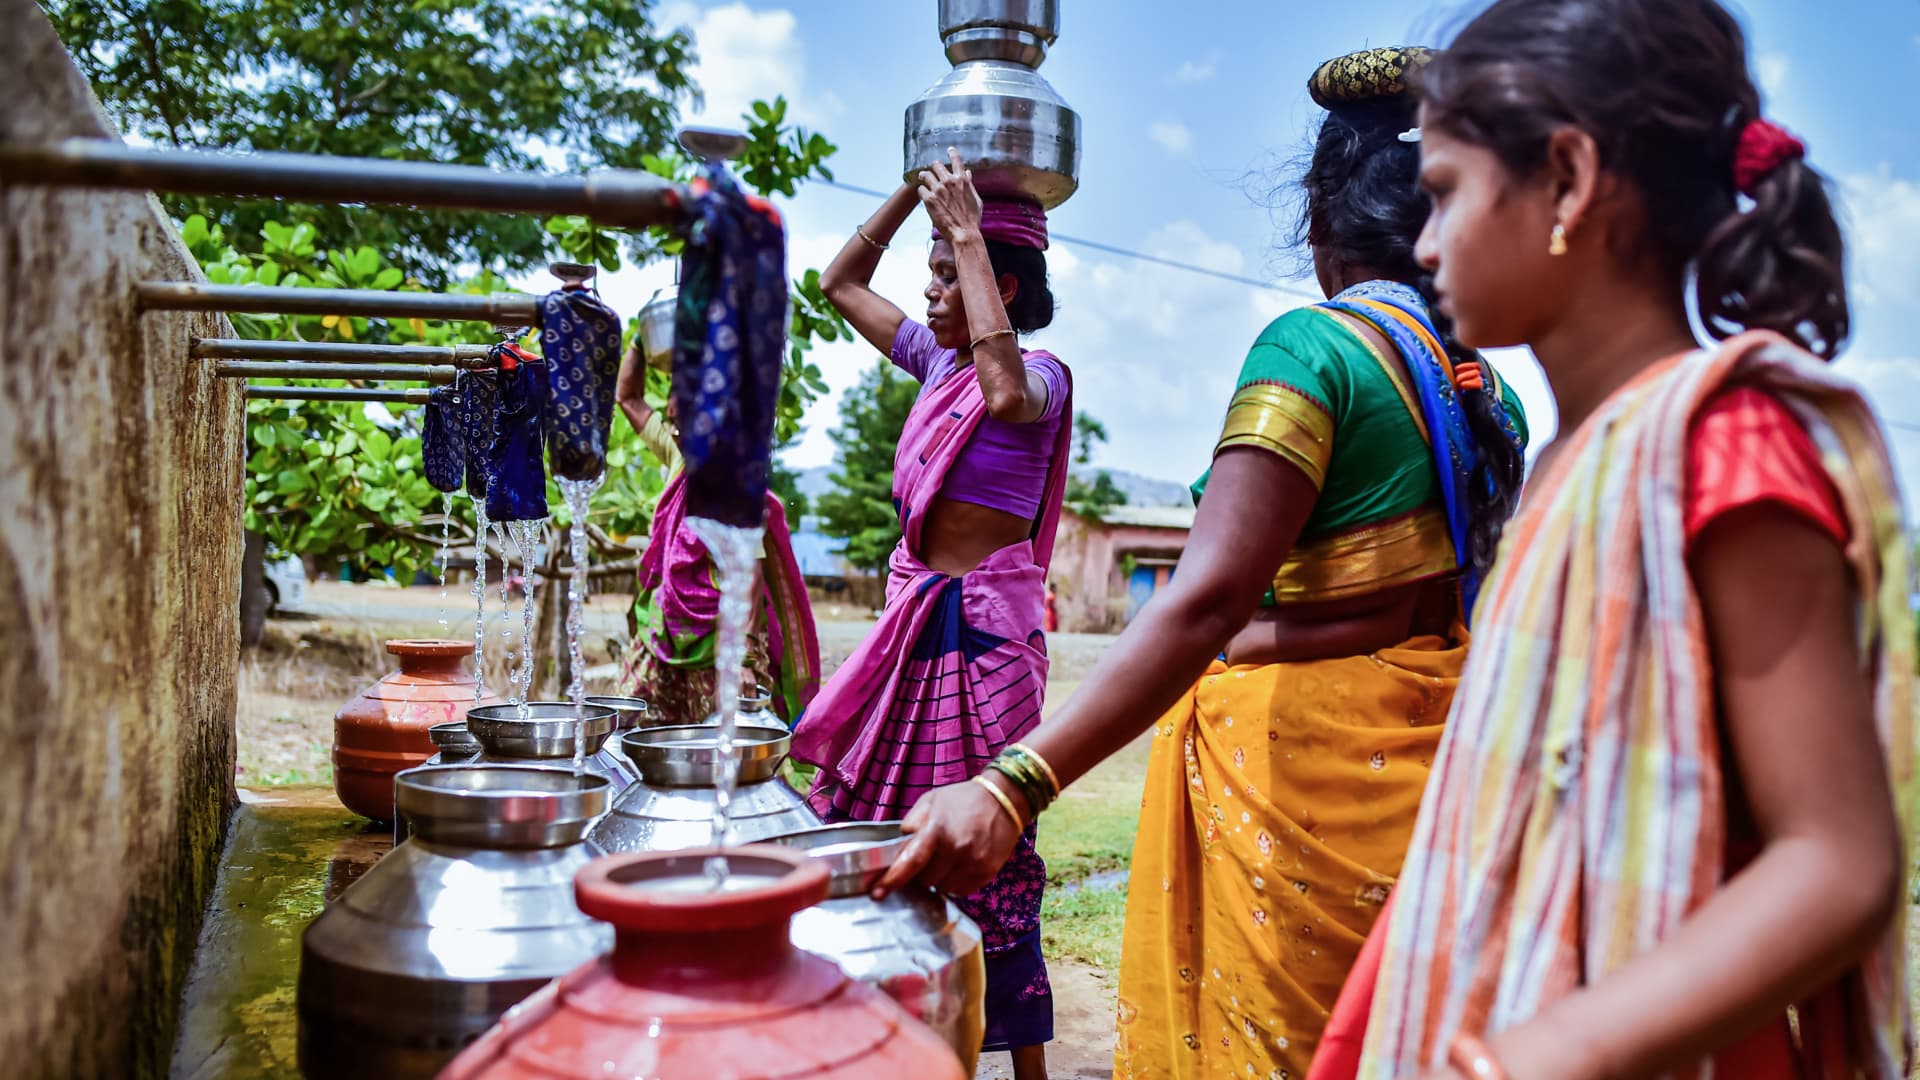 The scarcity of water is emerging as a global economic threat. With China and India looking the most at riskAsia is an industrialization hub tha...